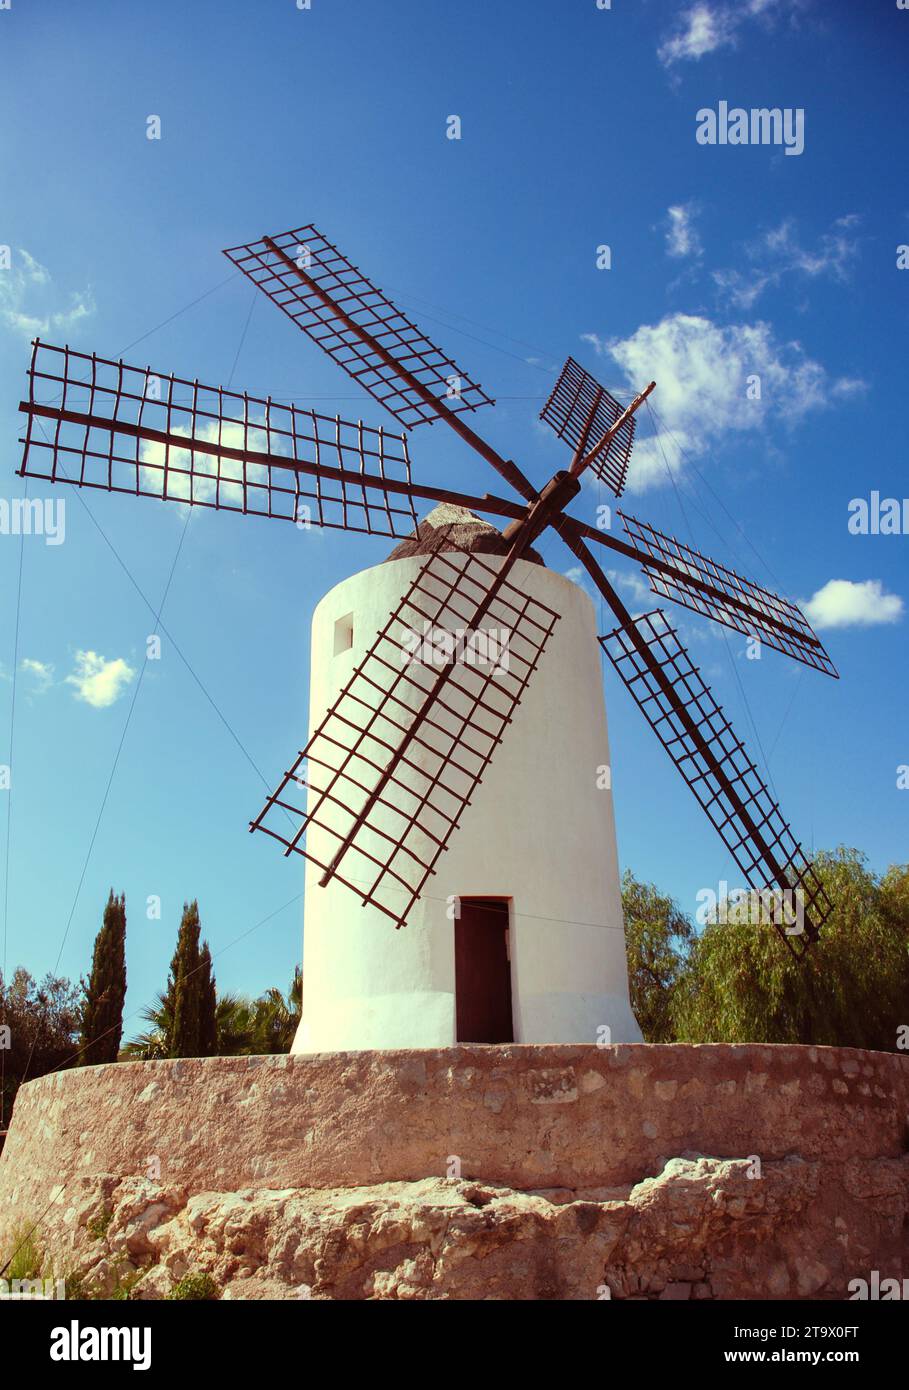 old windmill for grinding grain Stock Photo